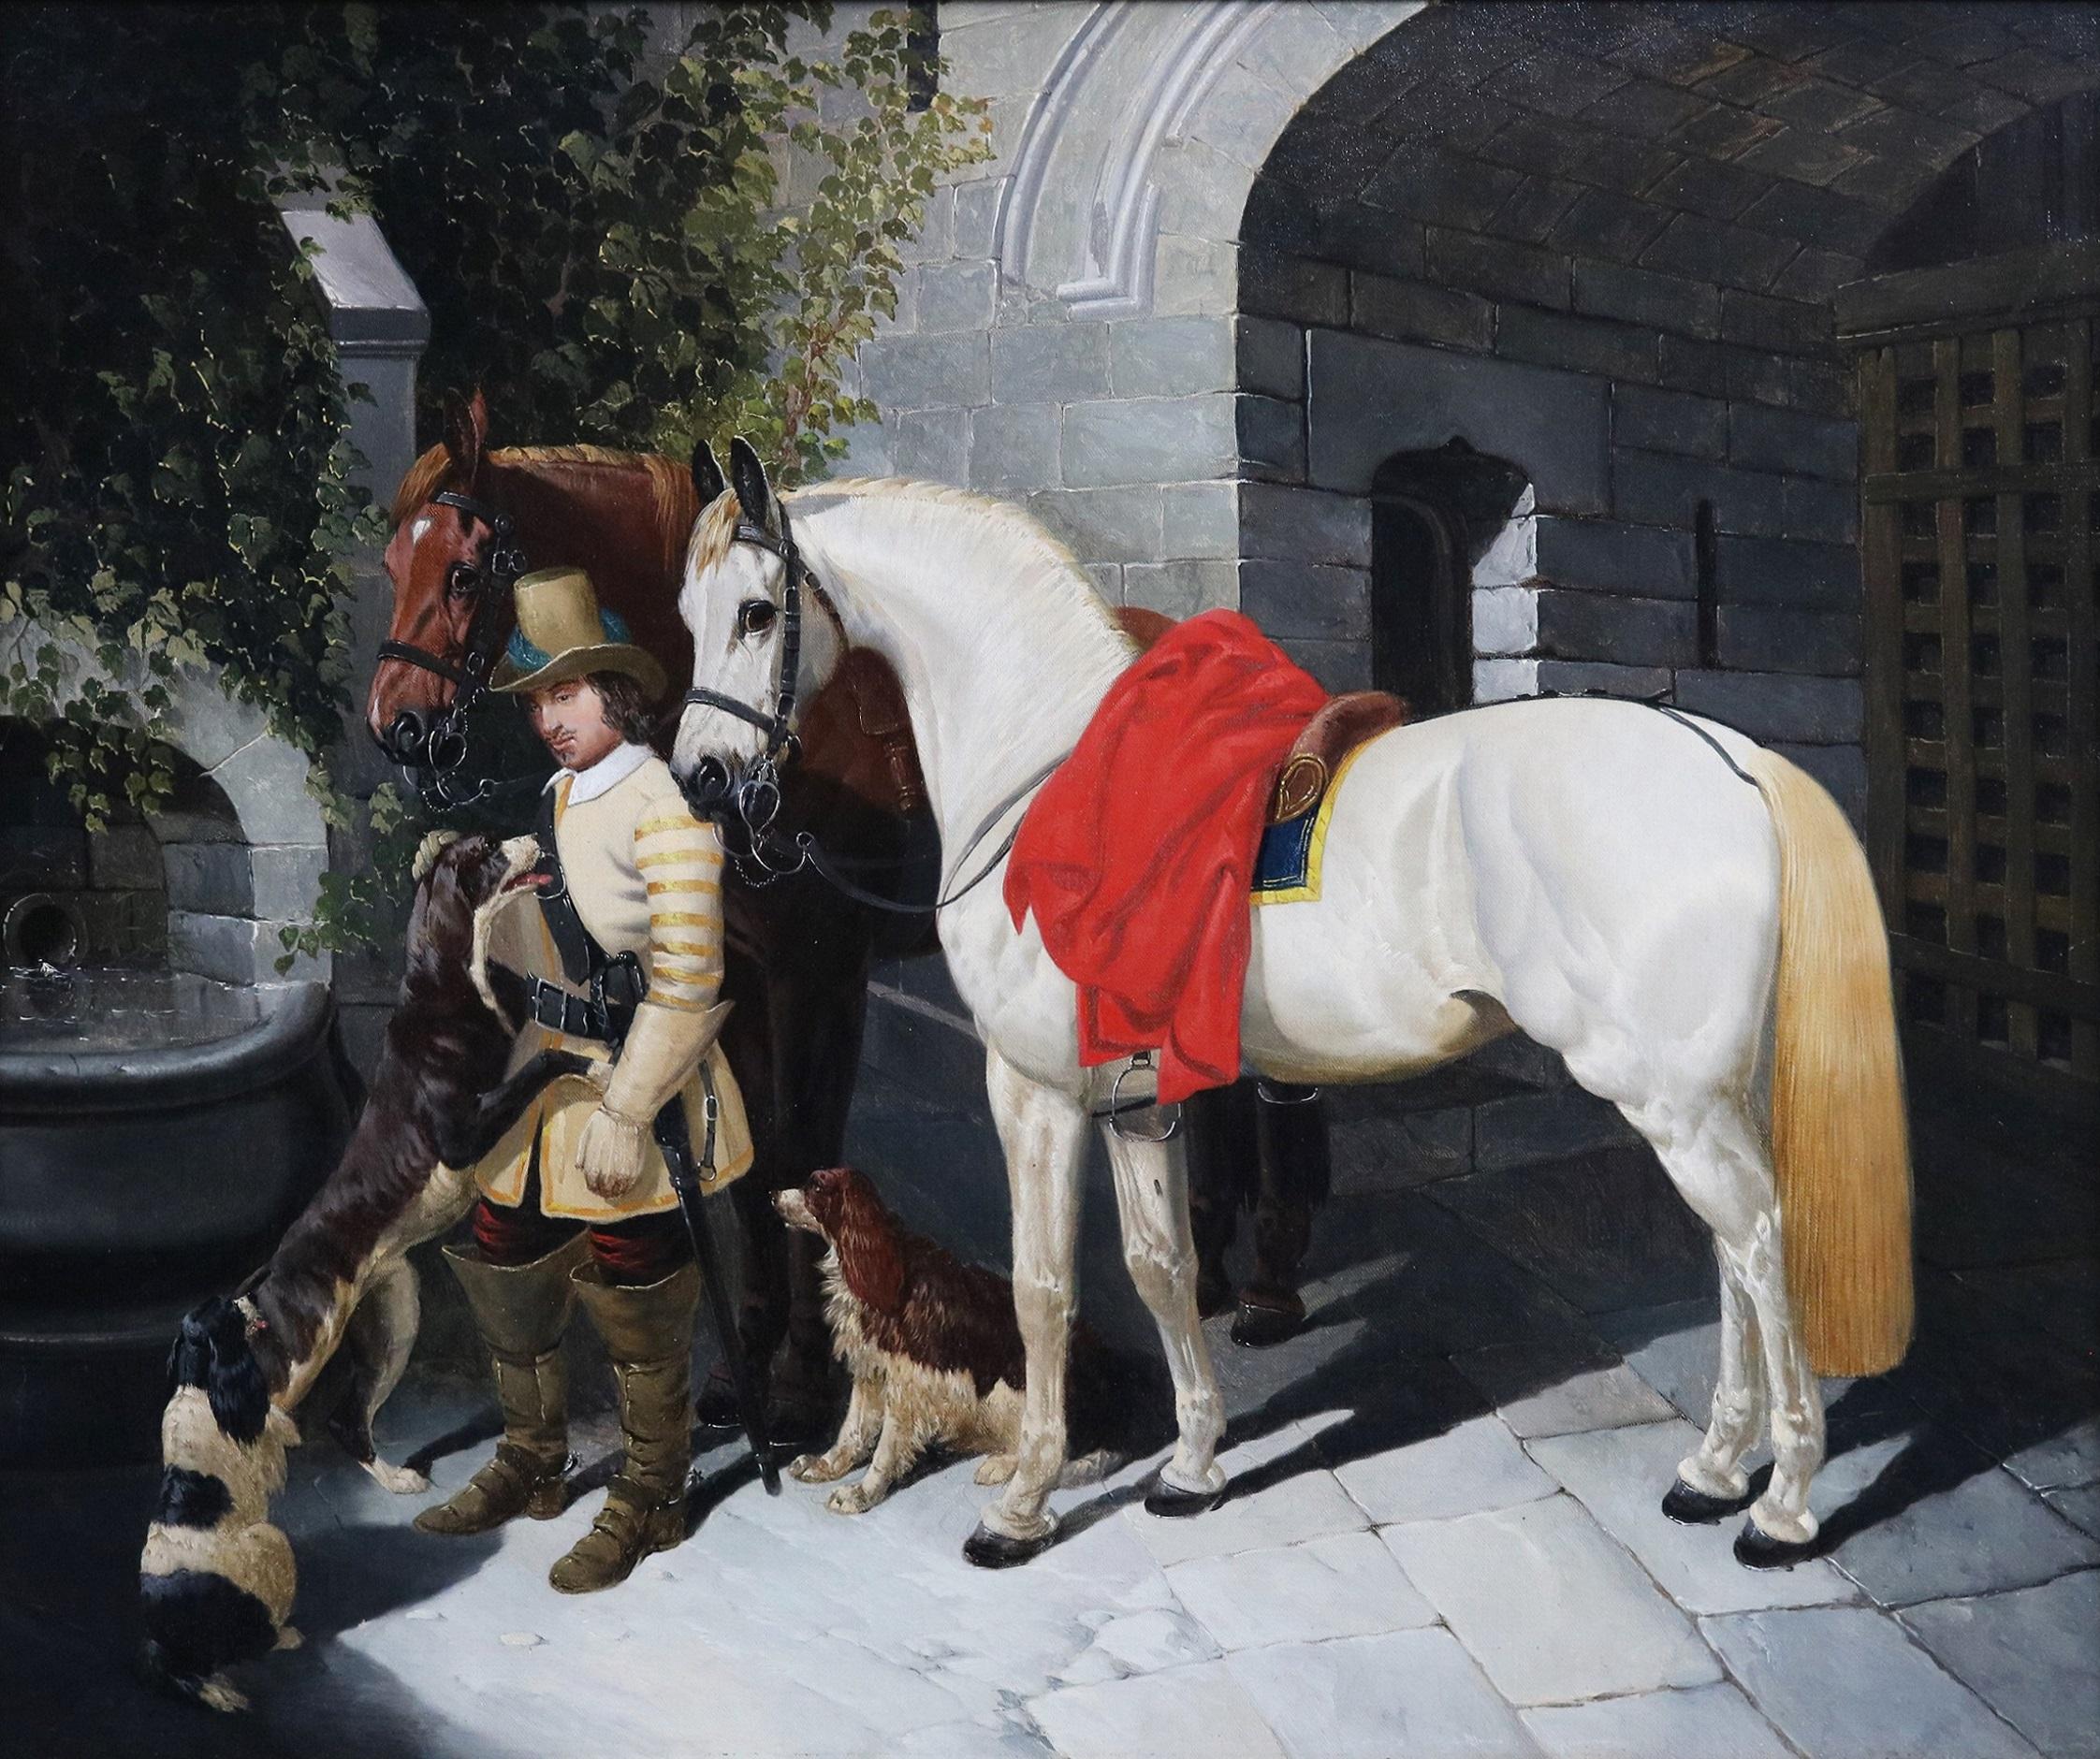 ‘The Baron’s Charger’ by John Frederick Herring Jr. (1815-1907). 

The painting – which depicts a 17th century Caroline nobleman with his battle horses and attendant hounds – is signed by the artist and indistinctly dated. It is presented in a fine